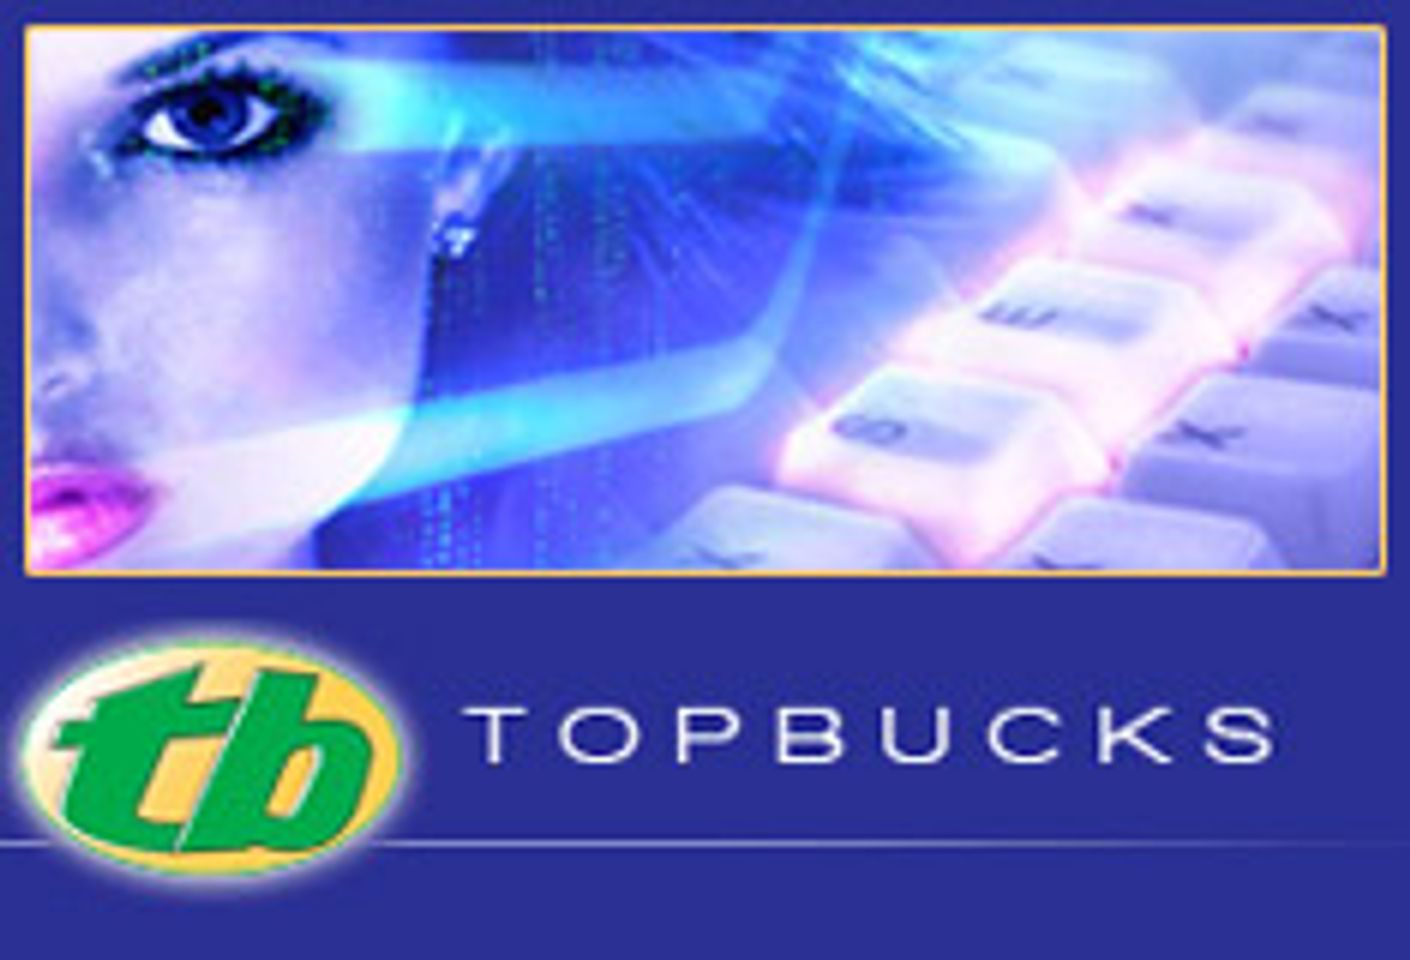 TopBucks Launches Four New Reality Sites With Bonus Payouts